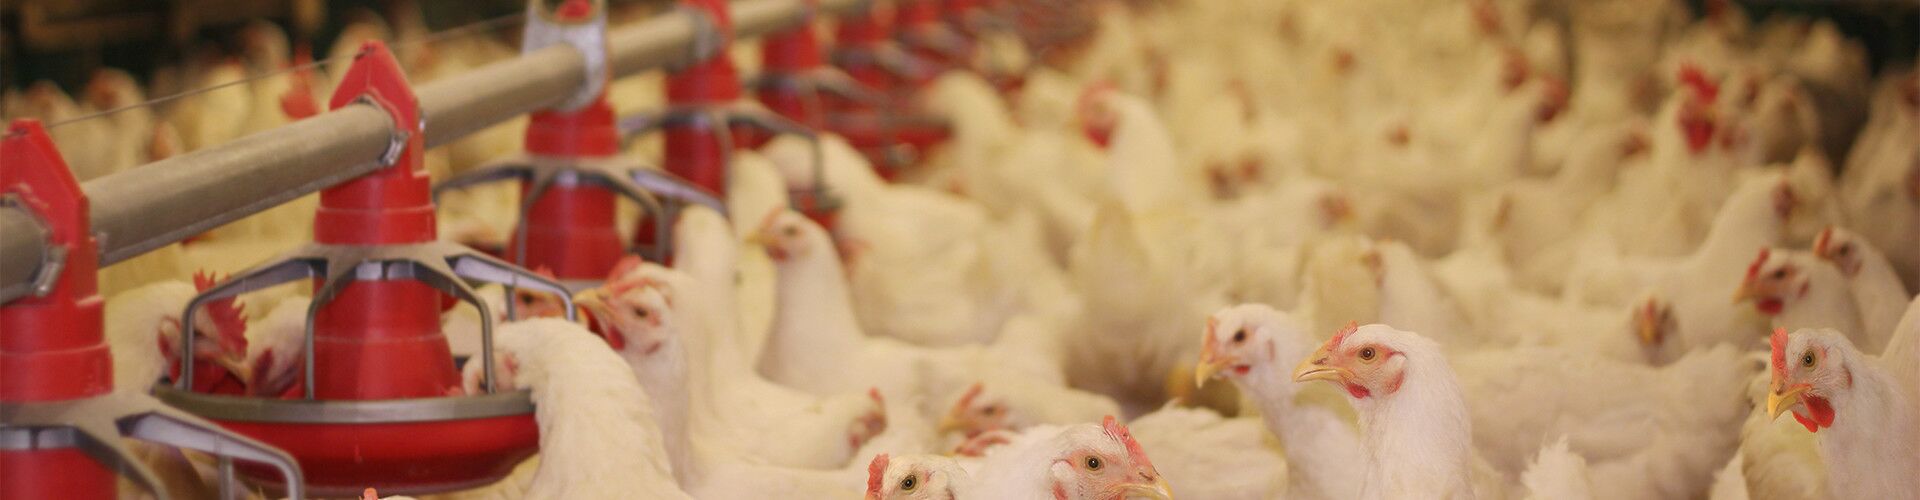 Poultry housing suppliers